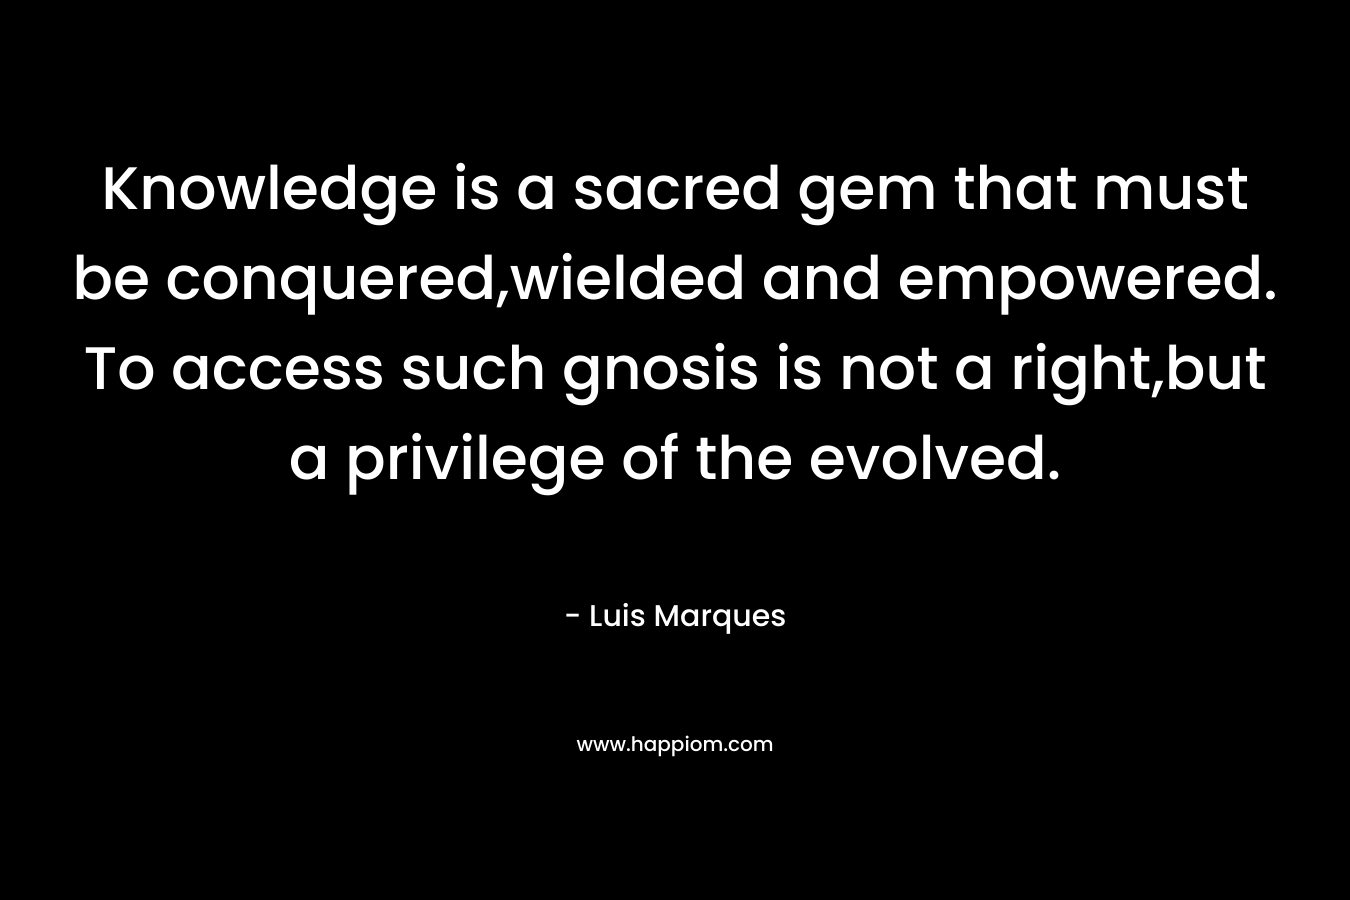 Knowledge is a sacred gem that must be conquered,wielded and empowered. To access such gnosis is not a right,but a privilege of the evolved. – Luis Marques